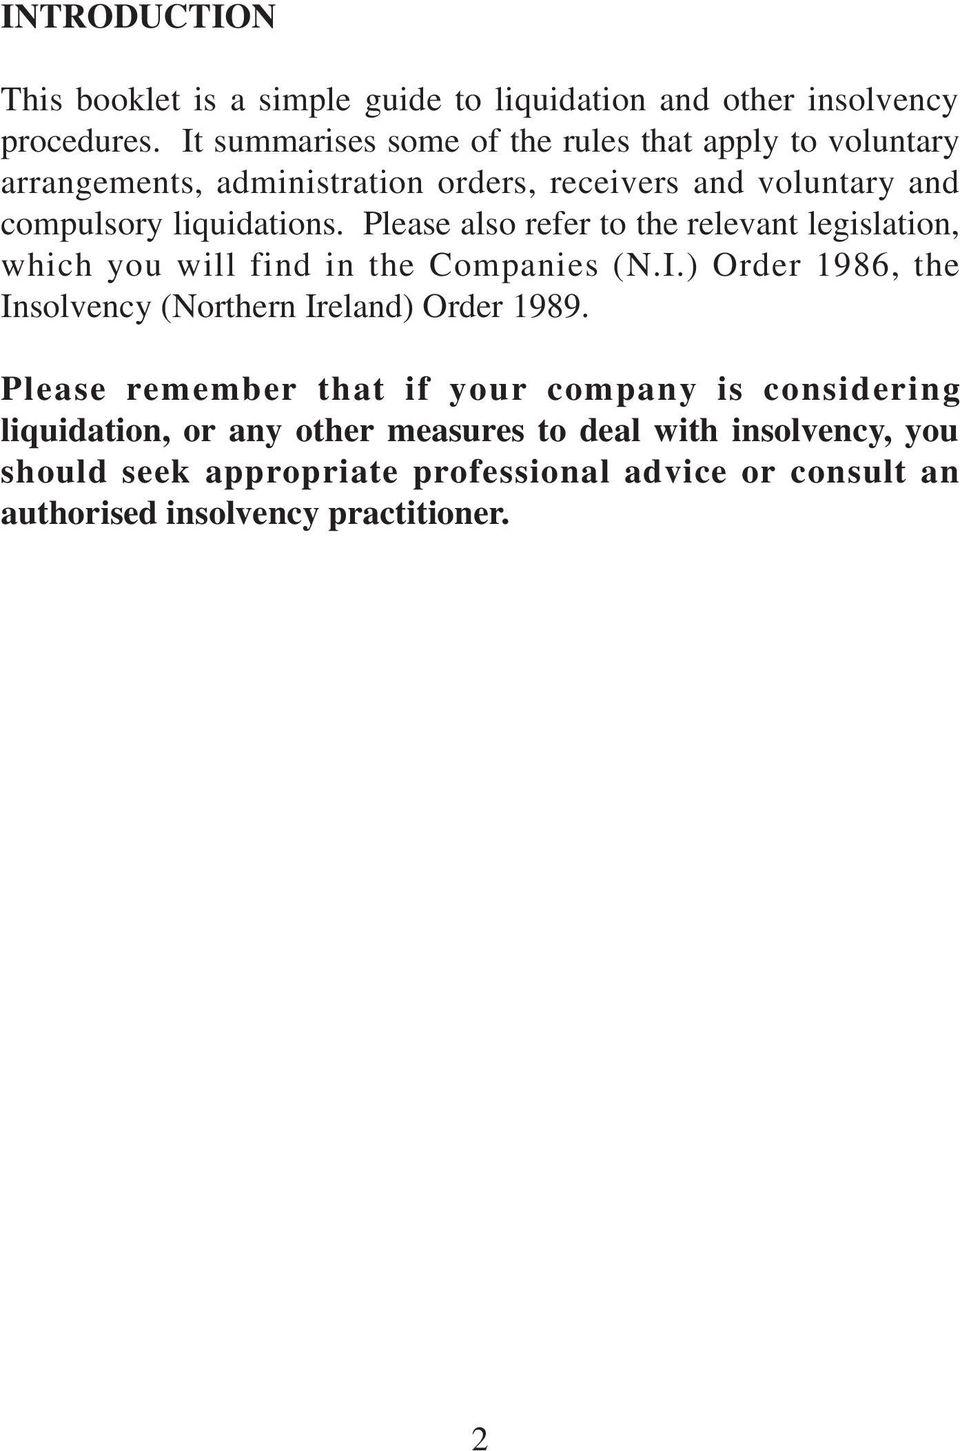 Please also refer to the relevant legislation, which you will find in the Companies (N.I.) Order 1986, the Insolvency (Northern Ireland) Order 1989.